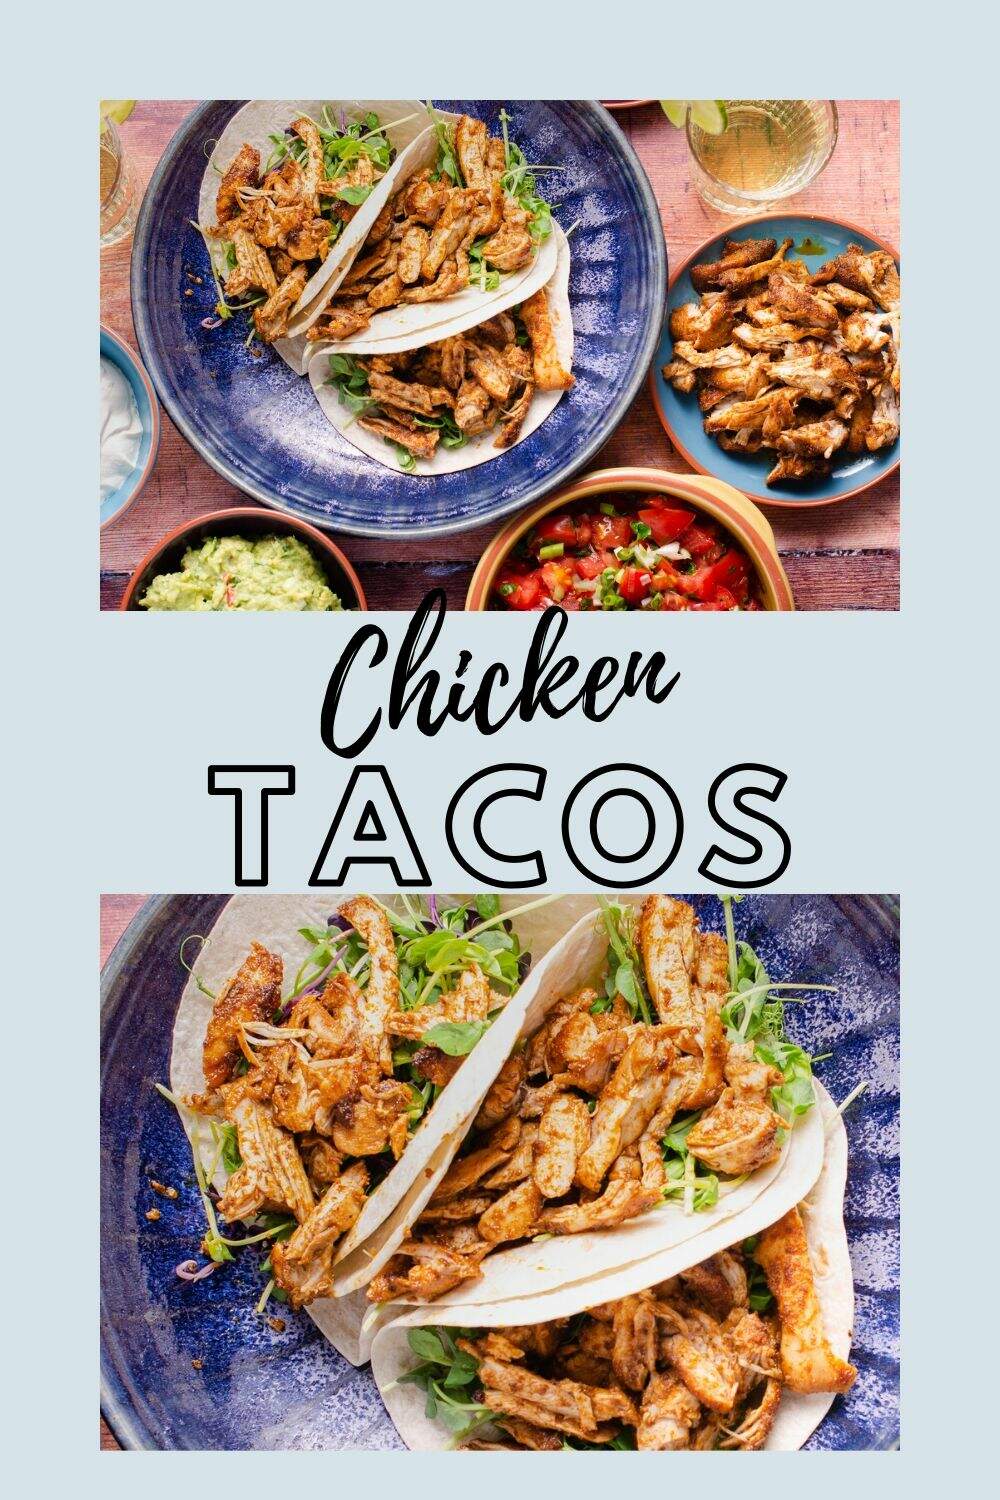 2 images showing taco table setting with chicken tacos and all the sides and then a close up of the chicken tacos.